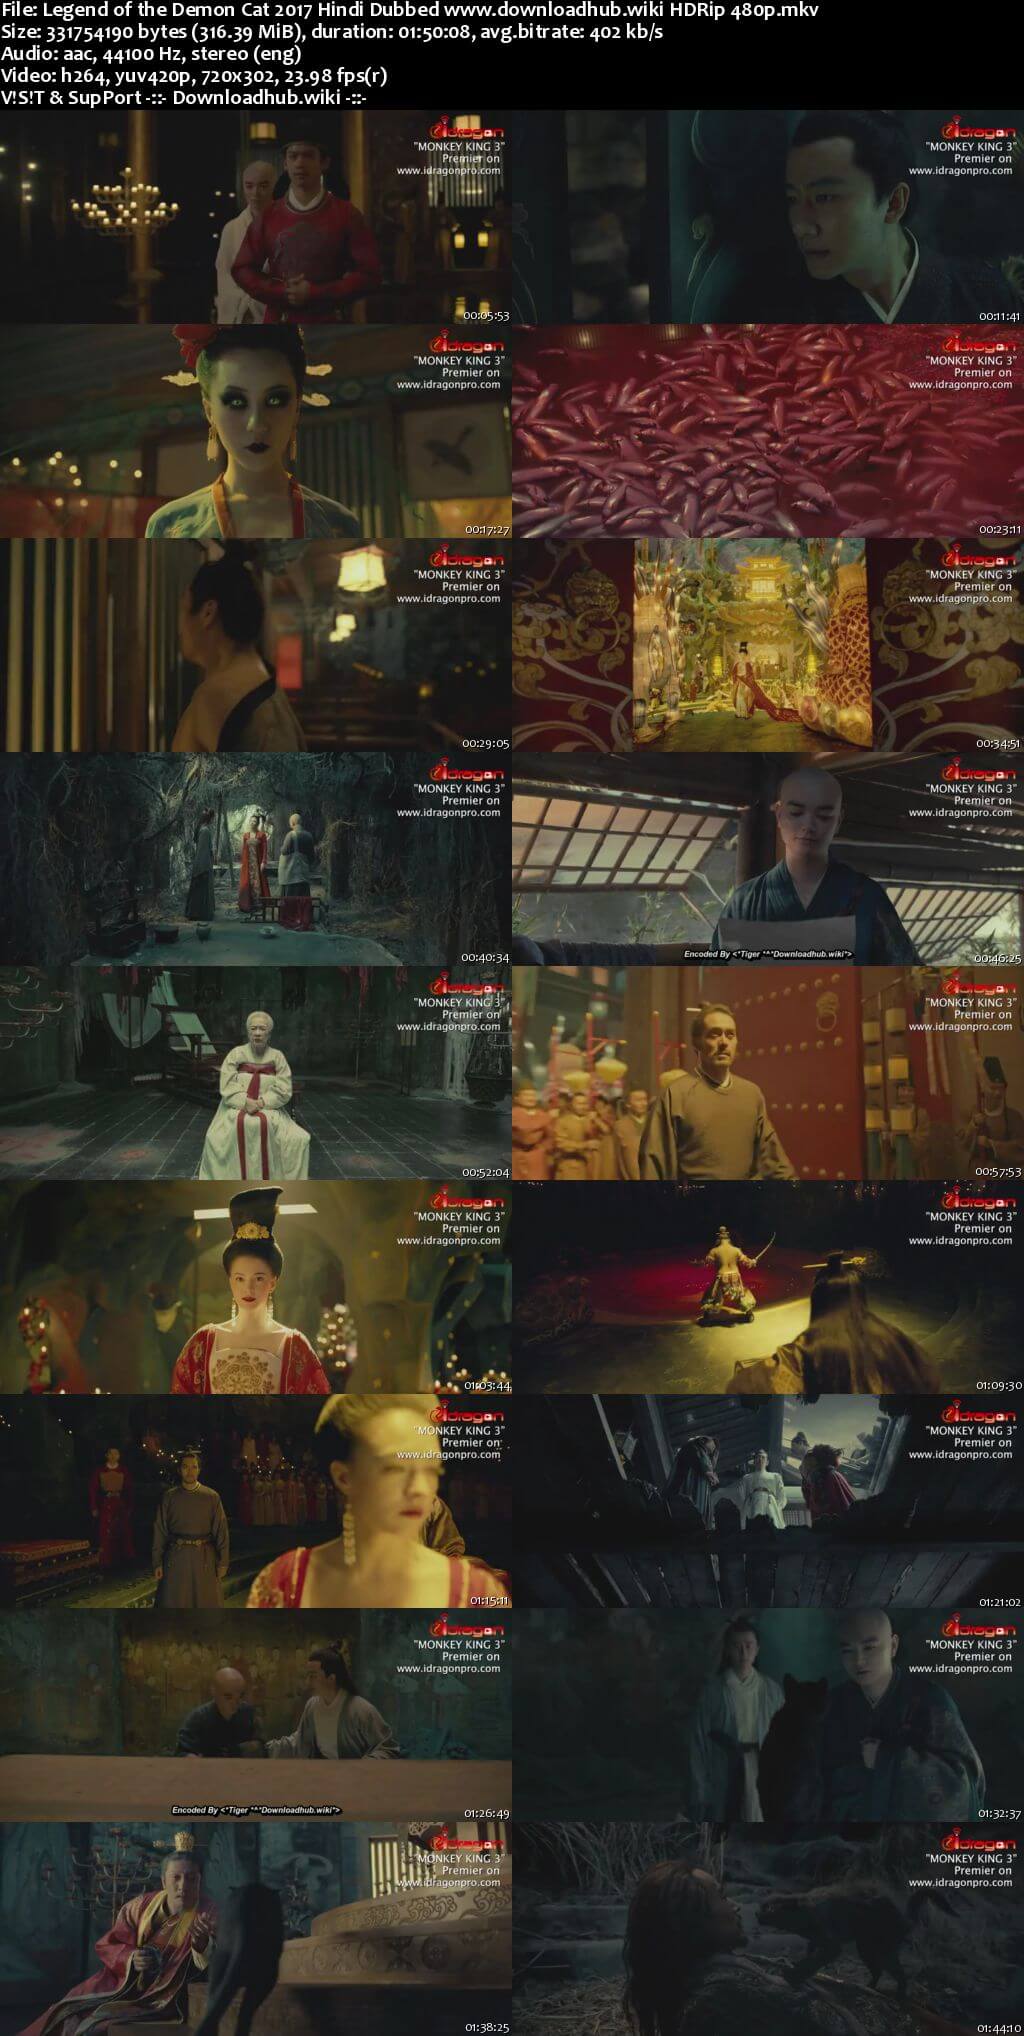 Legend of the Demon Cat 2017 Hindi Dubbed 300MB HDRip 480p